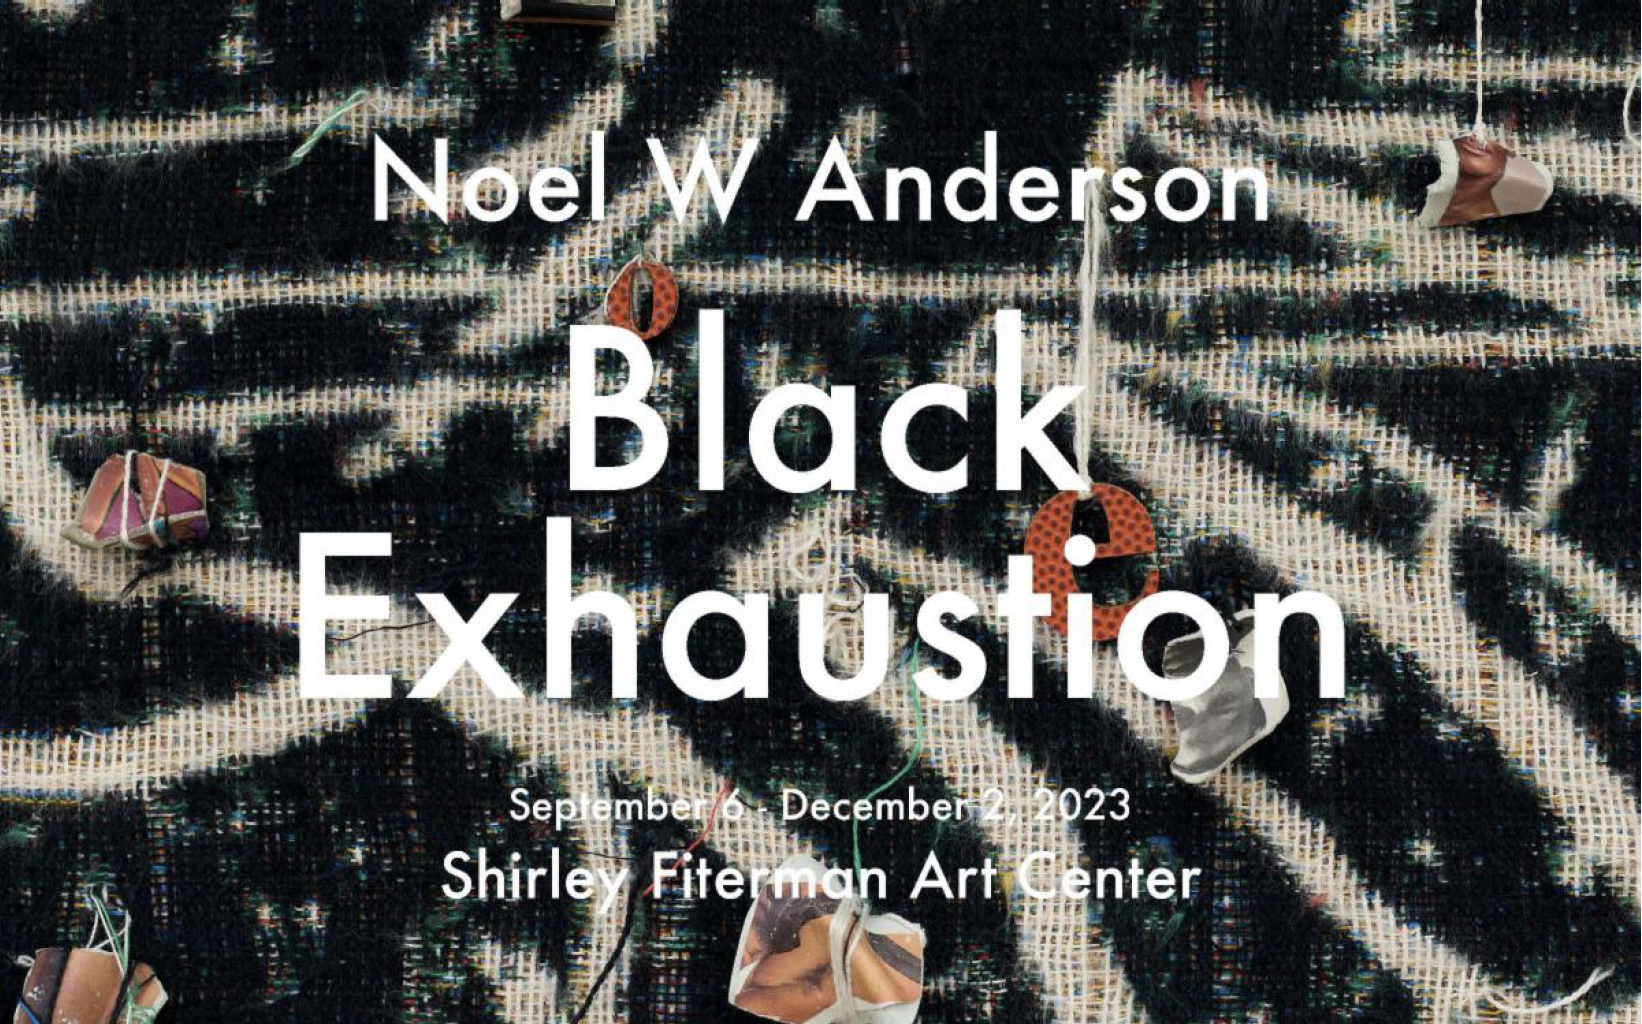 "Black Exhaustion," an exhibition by Noel W. Anderson, will be on view in the Shirley Fiterman Art Center September 6 - December 2, 2023.